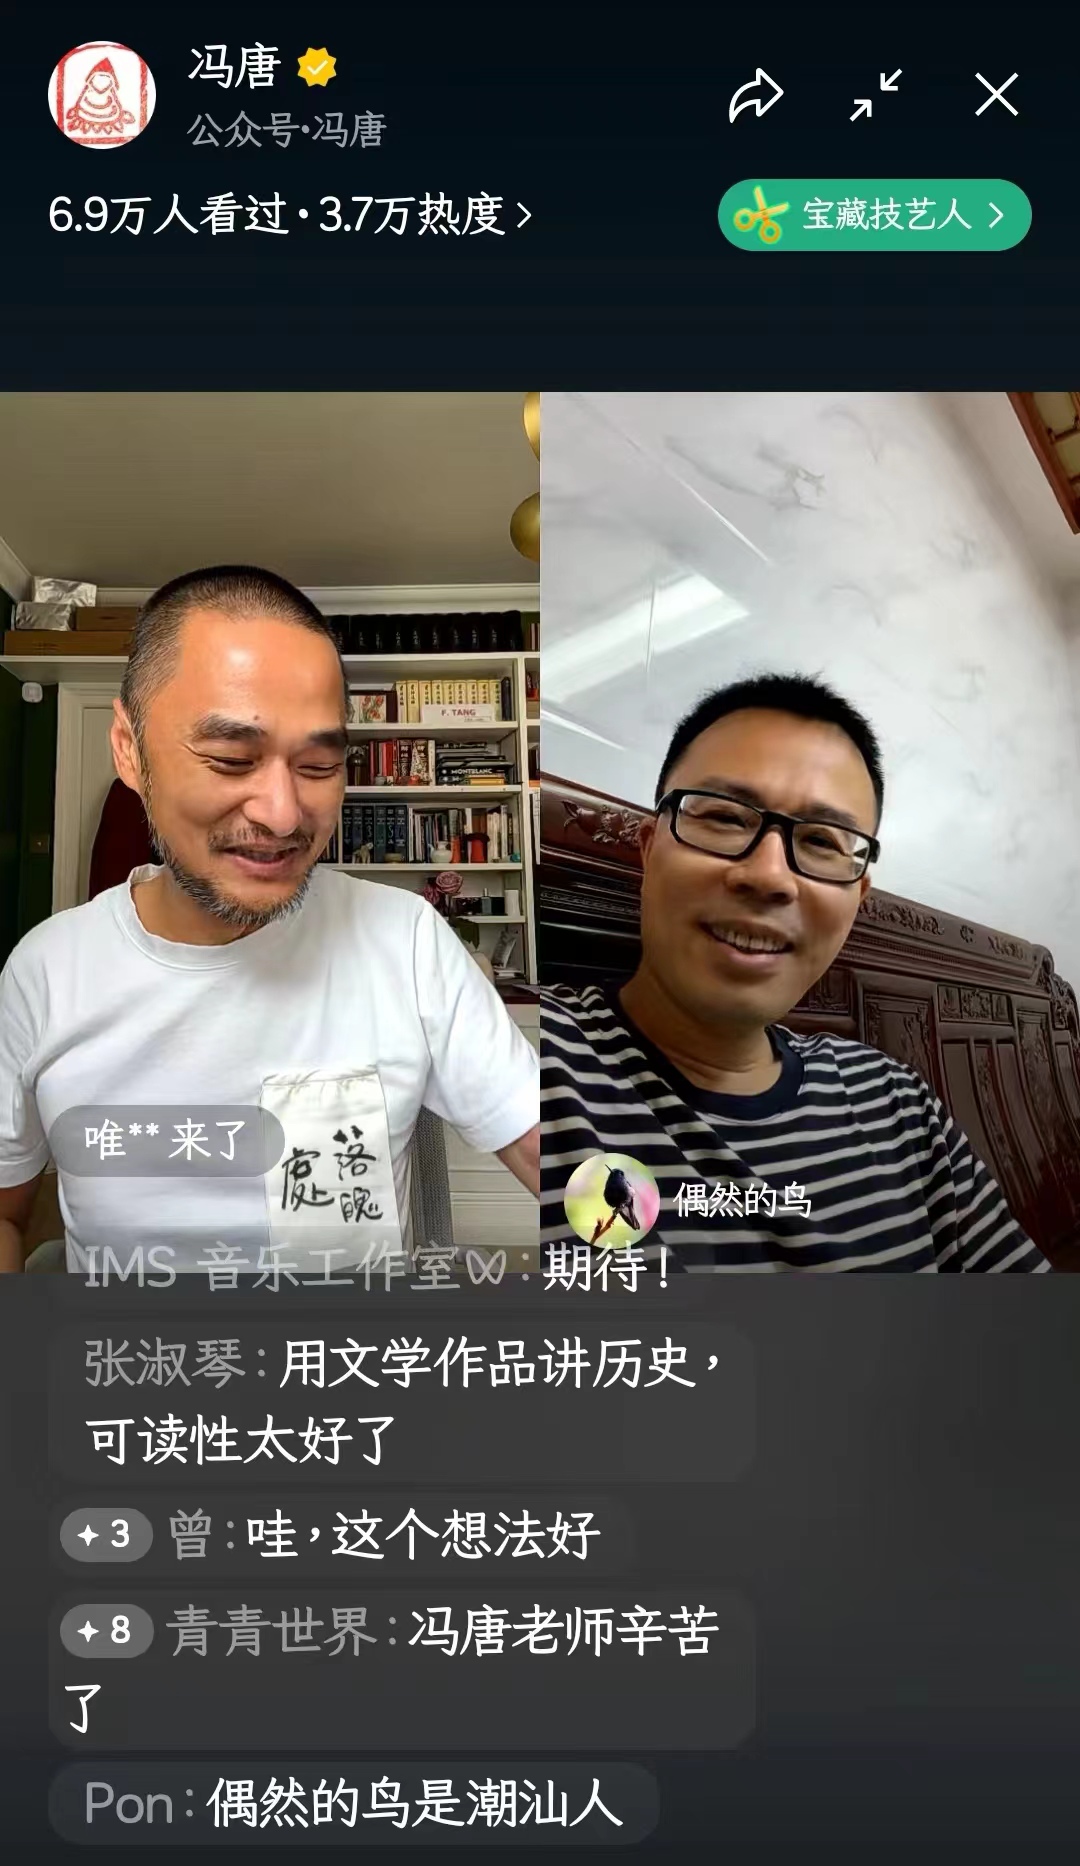 Li Jihong (right) and Feng Tang have a video chat